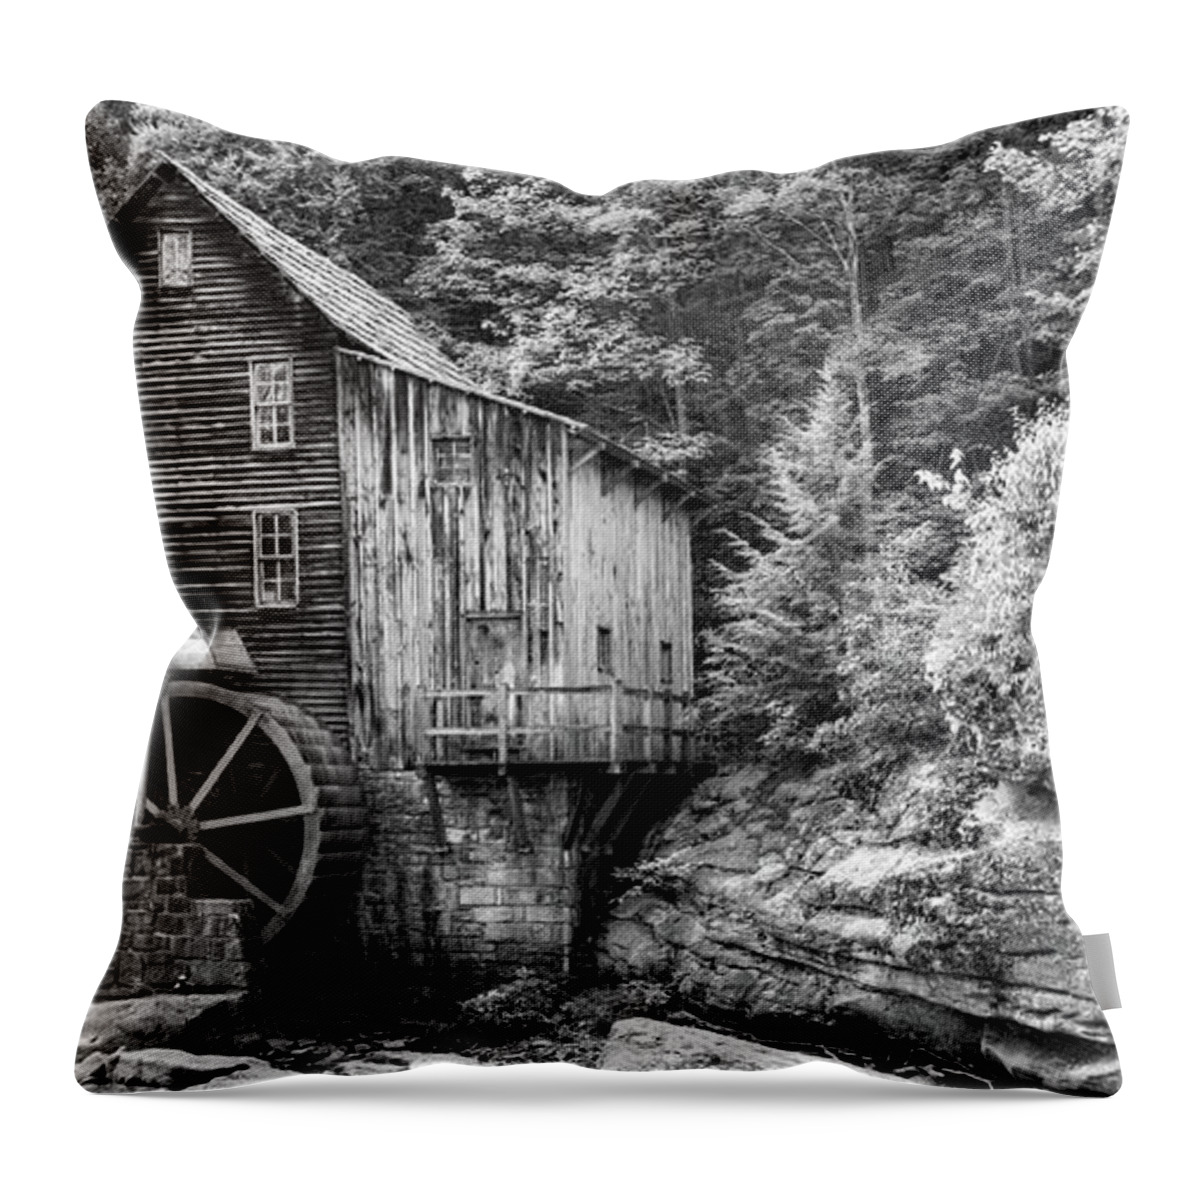 America Throw Pillow featuring the photograph Glade Creek Grist Mill Monochrome Panorama - West Virginia by Gregory Ballos